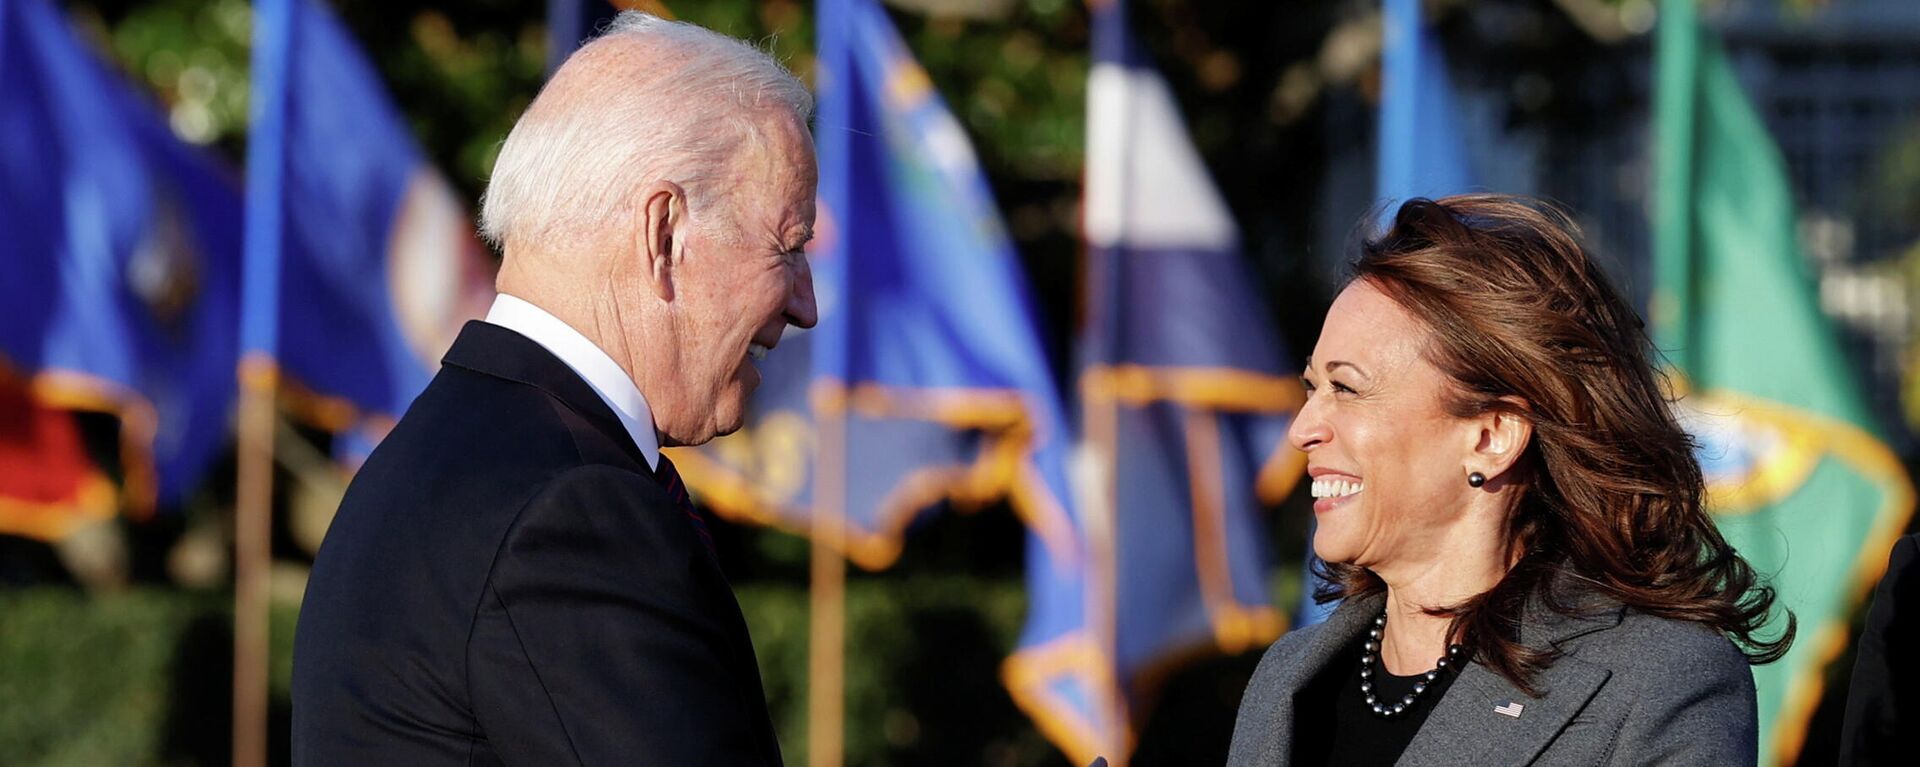 U.S. President Joe Biden and Vice-President Kamala Harris shake hands during a ceremony to sign the Infrastructure Investment and Jobs Act, on the South Lawn at the White House in Washington, U.S., November 15, 2021 - Sputnik International, 1920, 23.01.2022